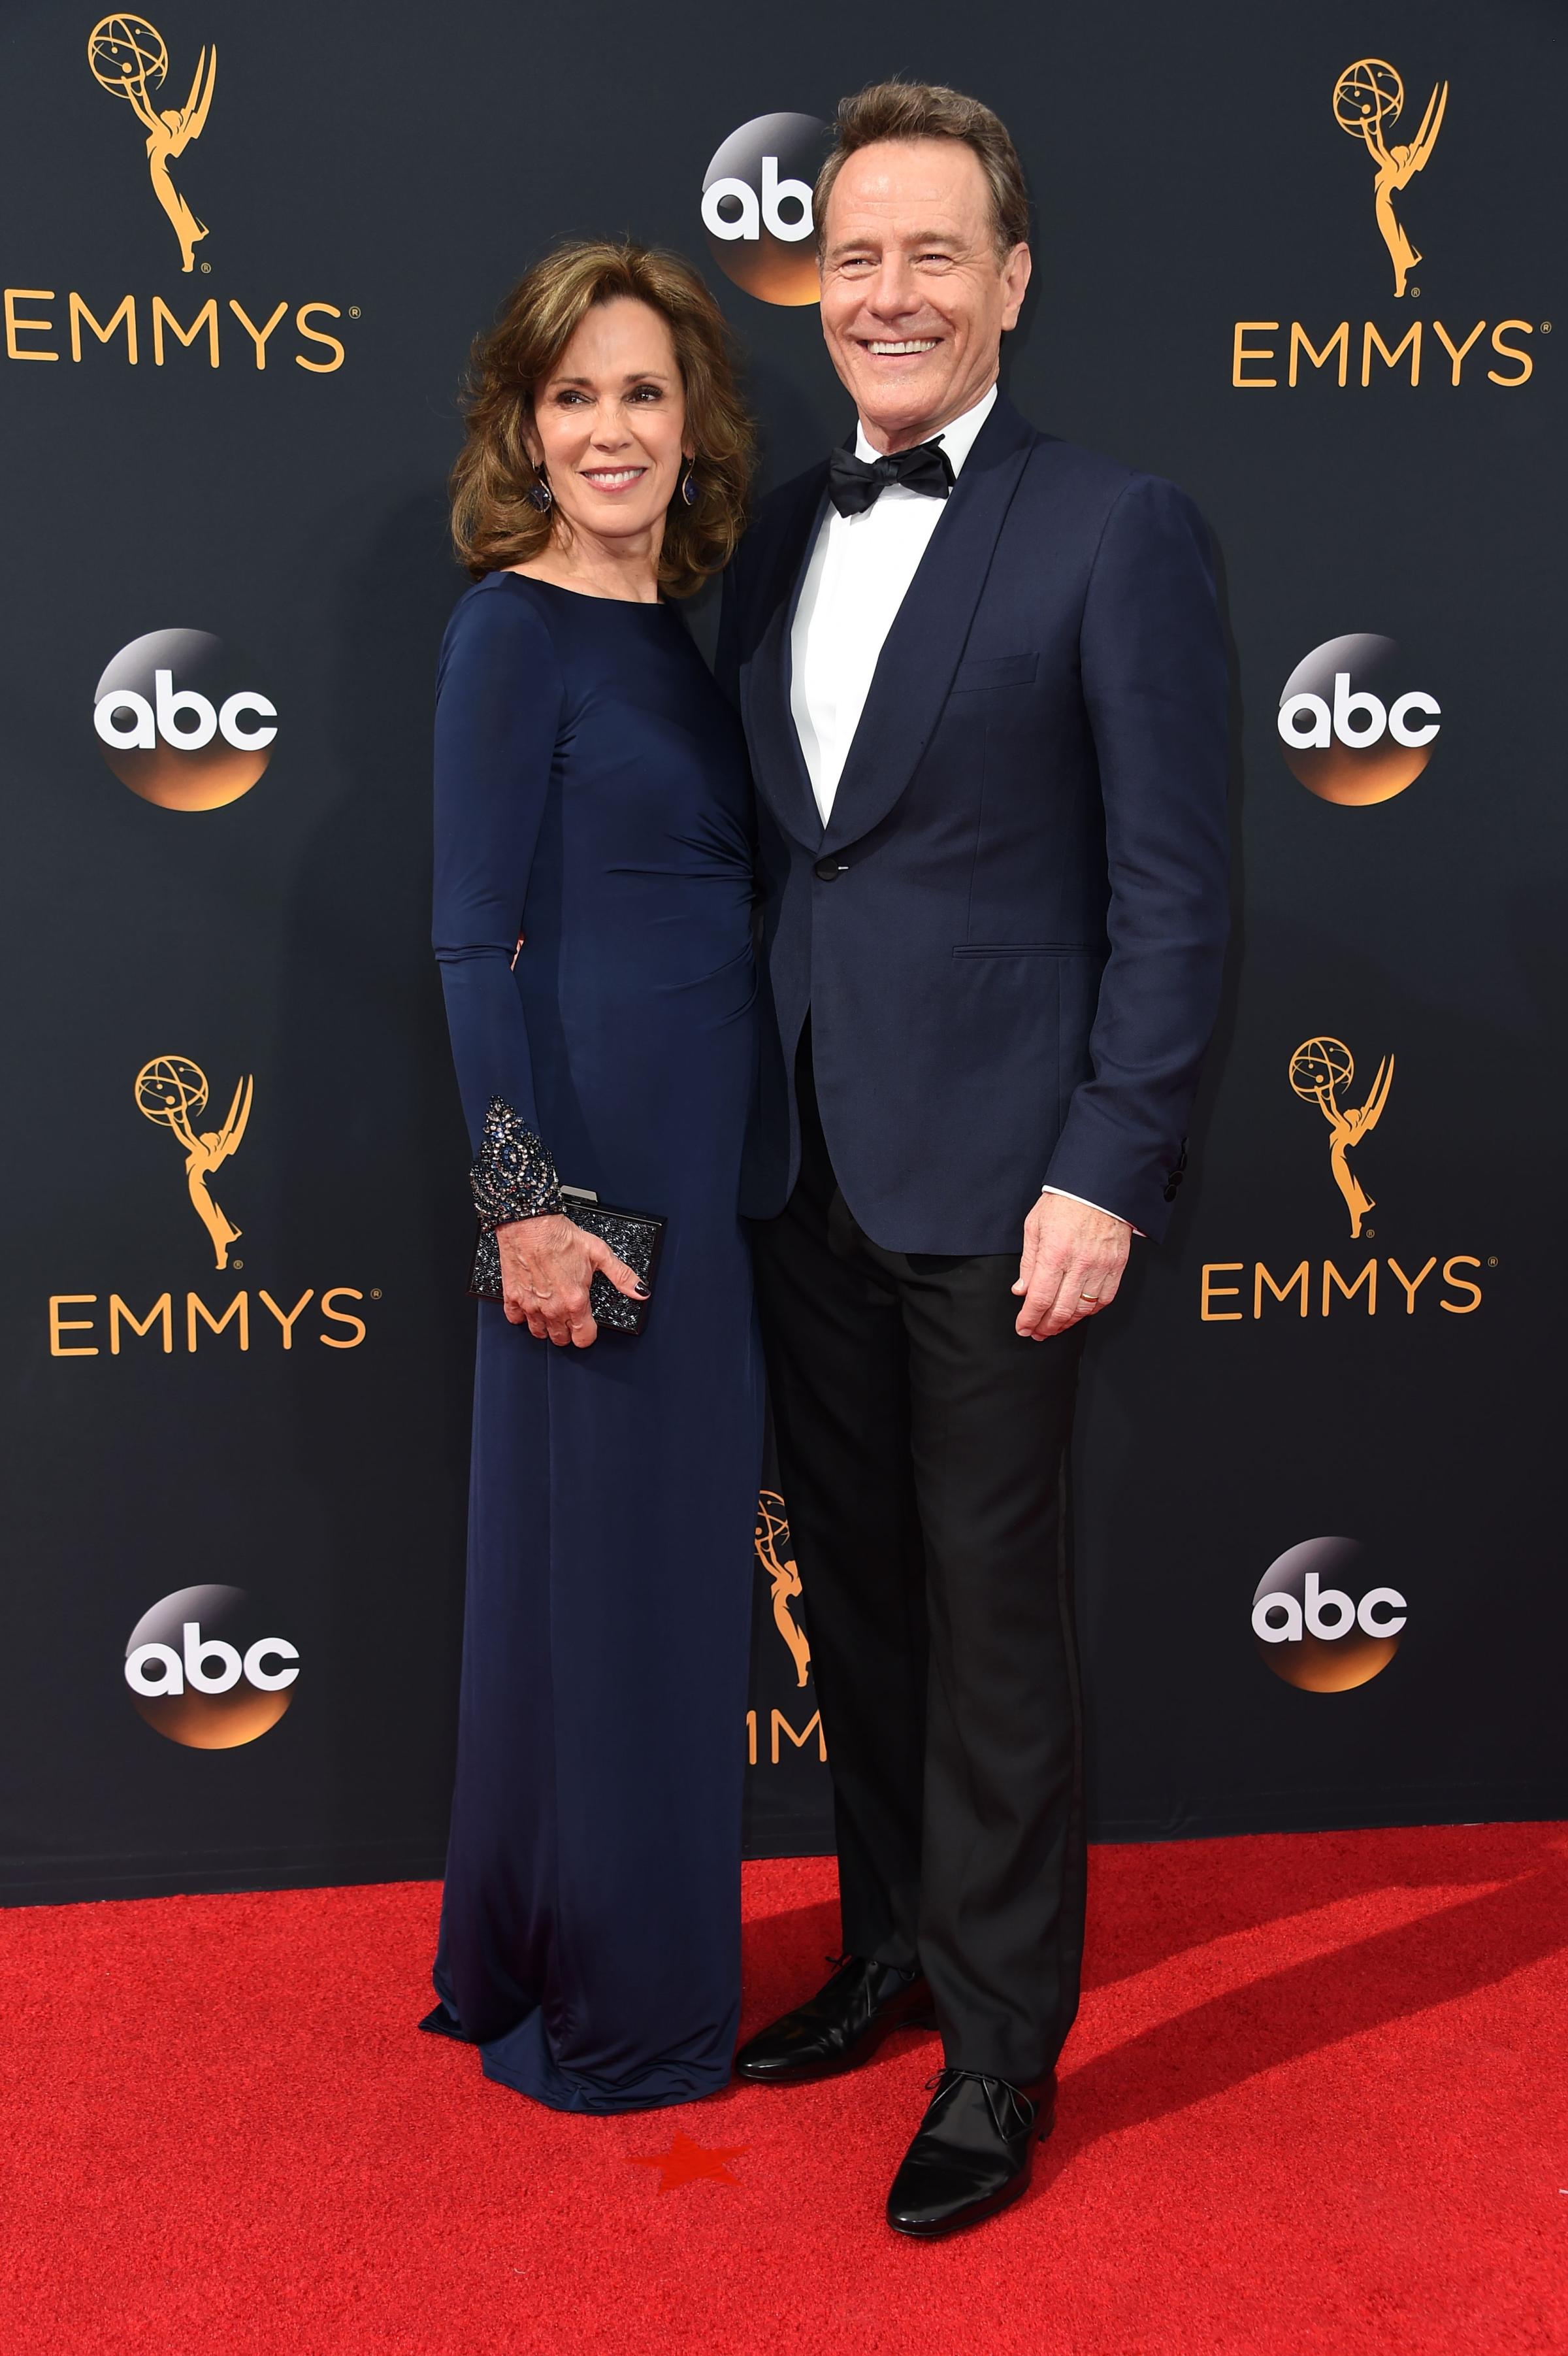 Robin Dearden and Bryan Cranston arrive at the 68th Annual Primetime Emmy Awards at Microsoft Theater on September 18, 2016 in Los Angeles.